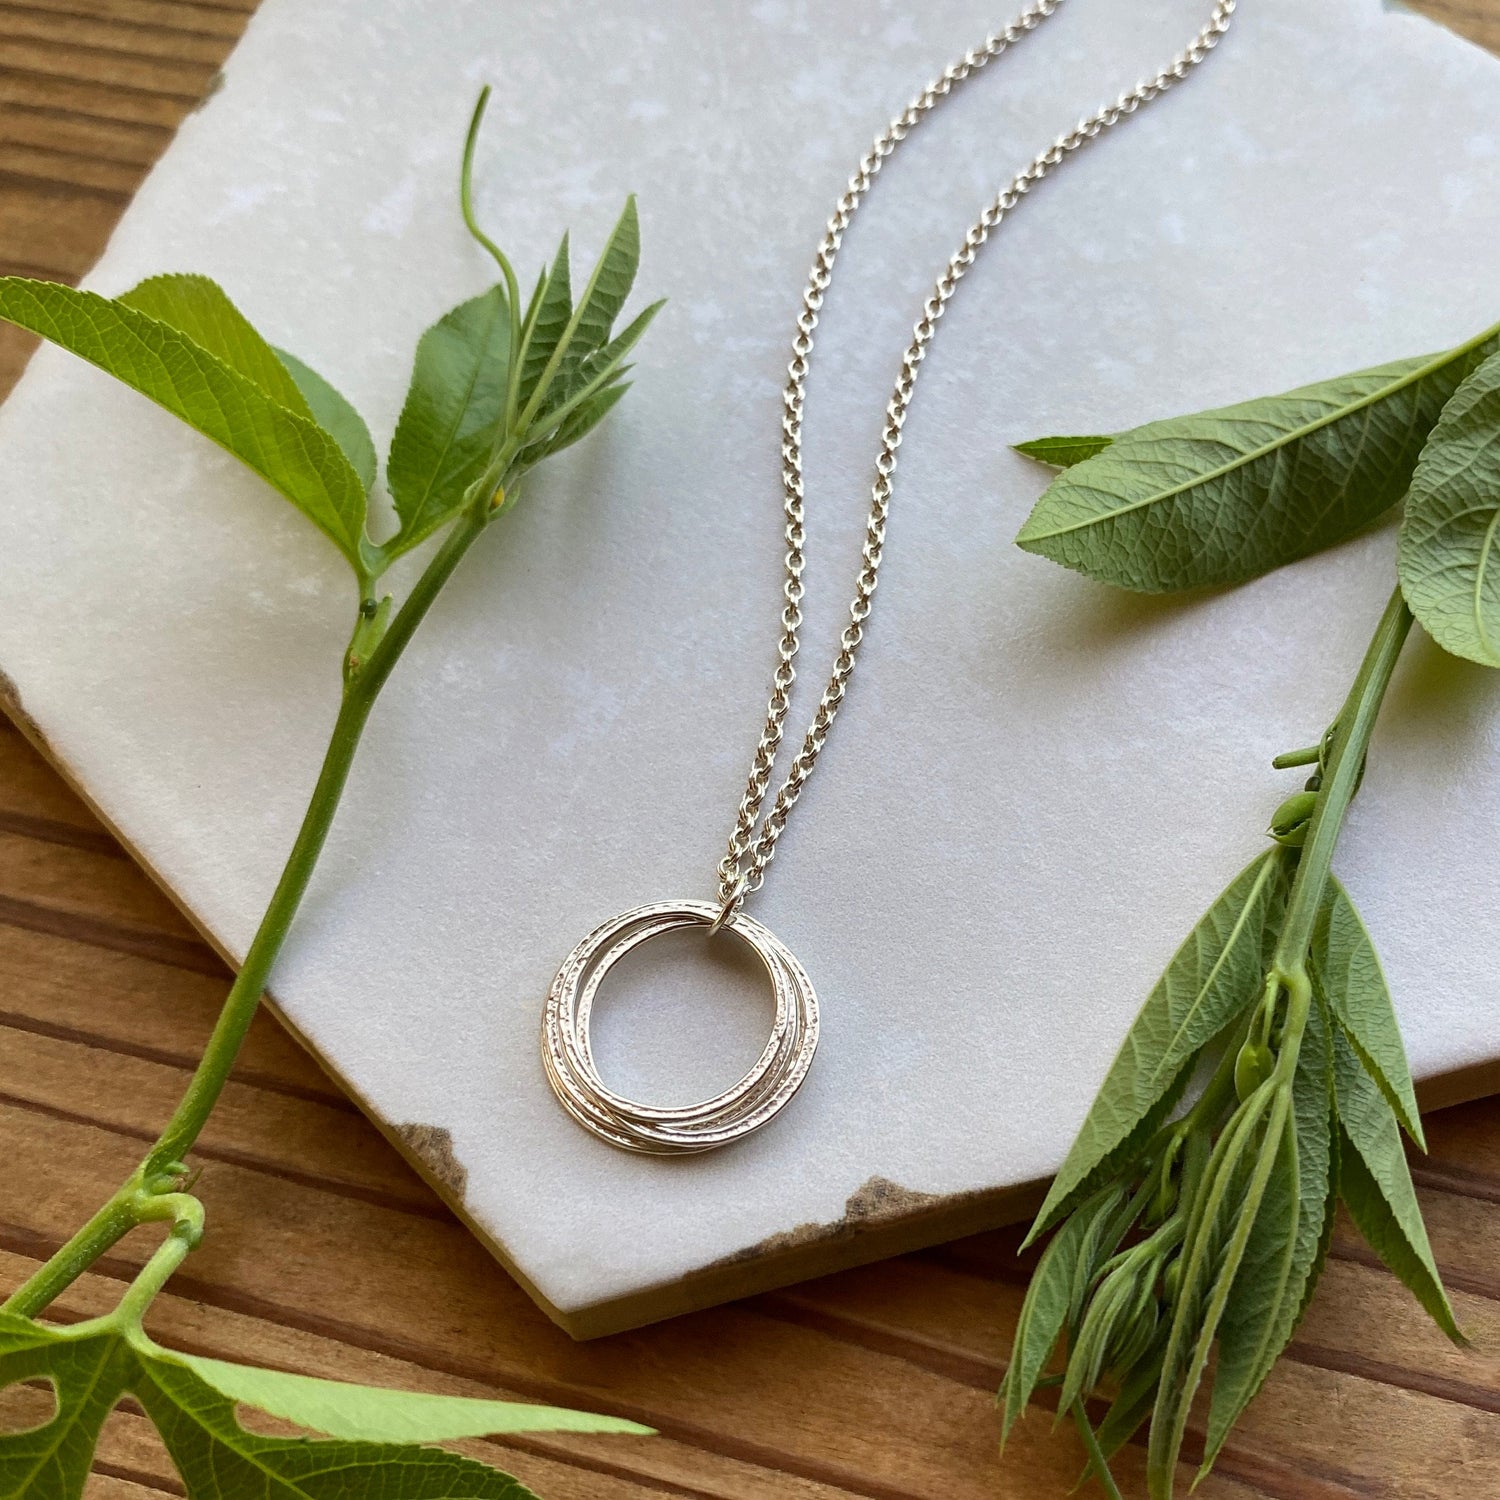 Four Circle 40th Milestone Minimalist Birthday Necklace, Sterling Silver 4 Rings for 4 Decades Handcrafted Perfectly Imperfect Pendant